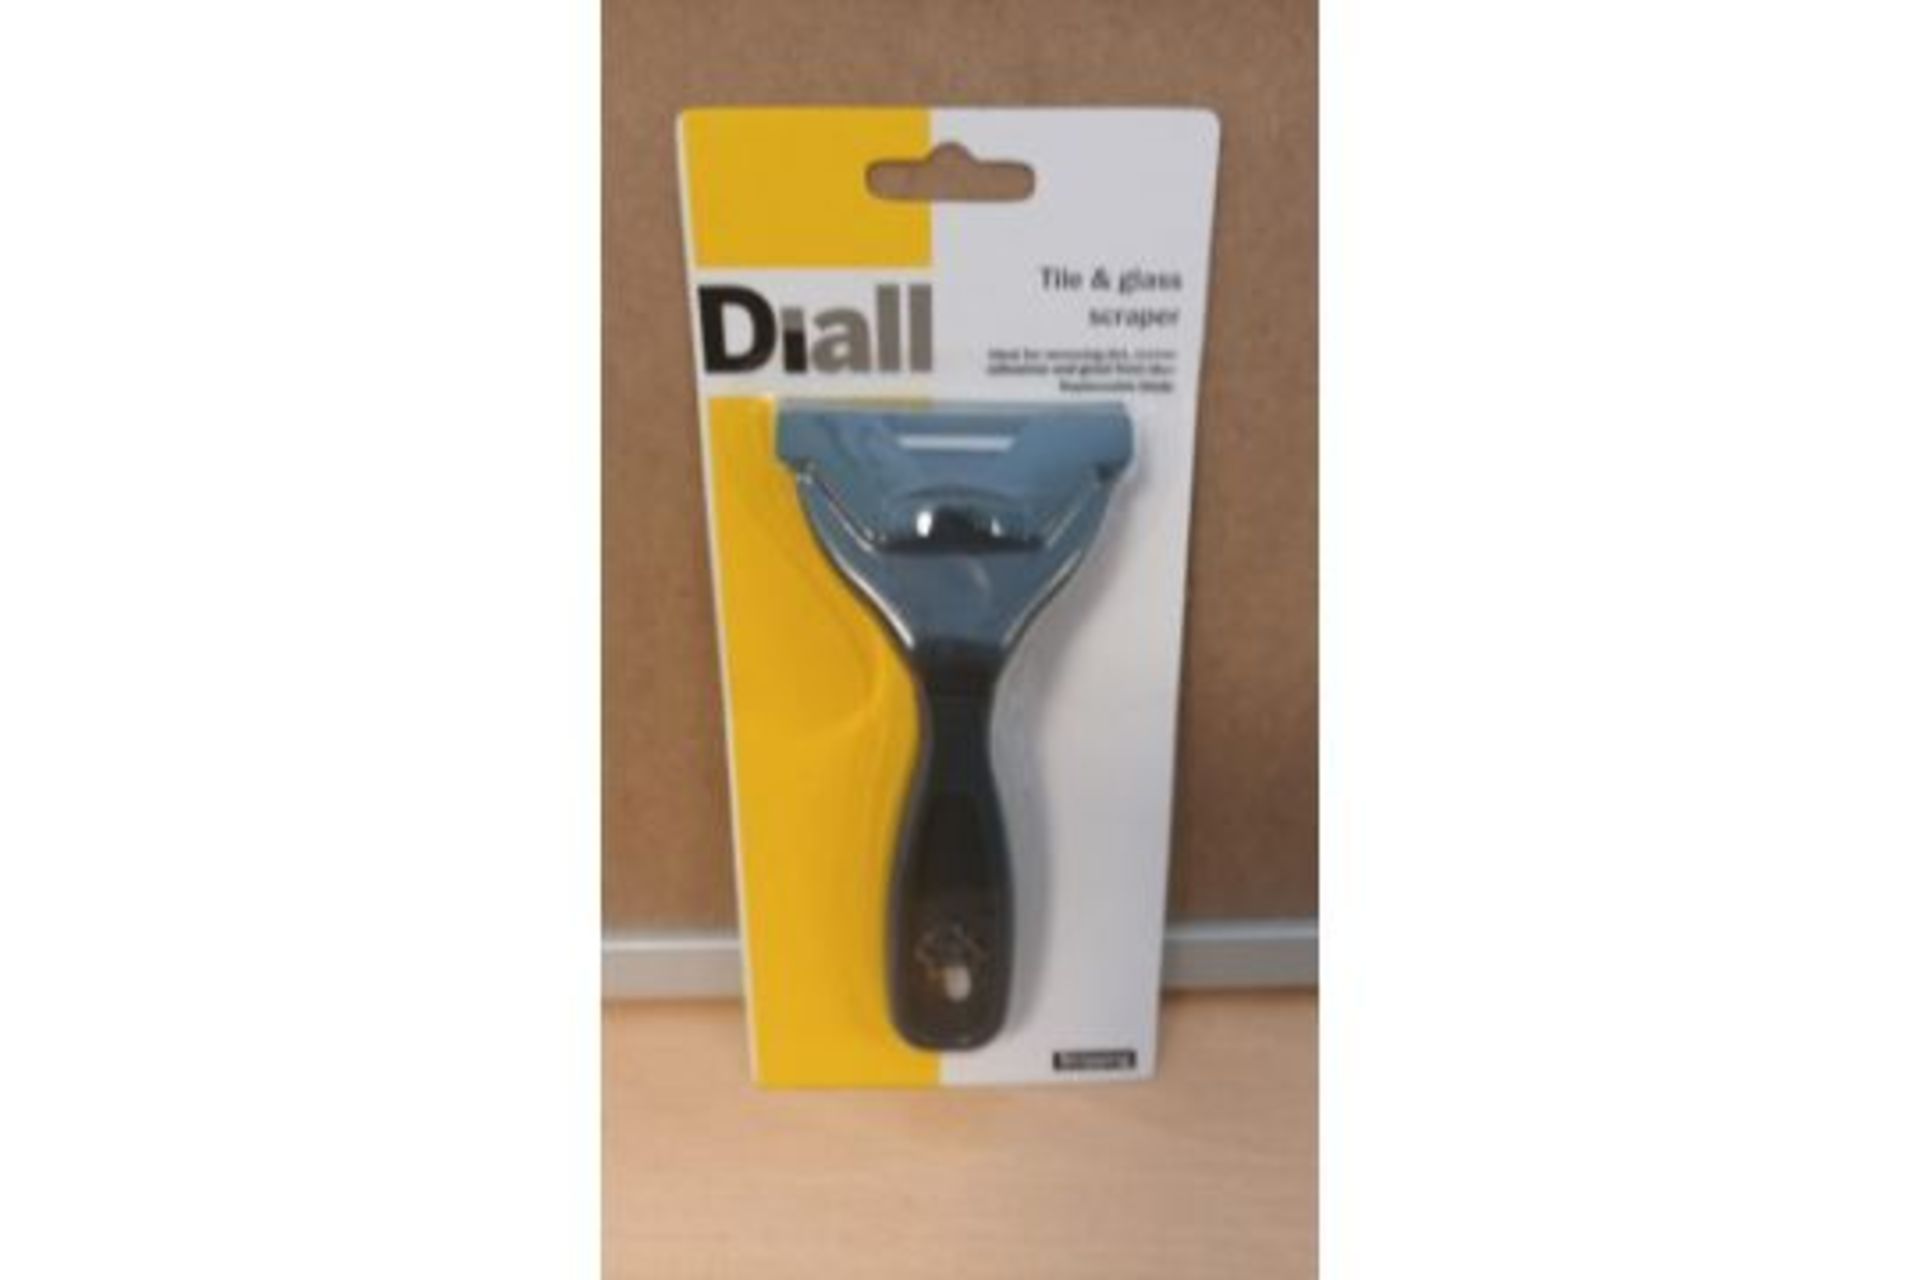 72 X NEW PACKAGED DIALL TILE & GLASS SCRAPERS WITH BLADE. IDEAL FOR REMOVING DIRT, EXCESS